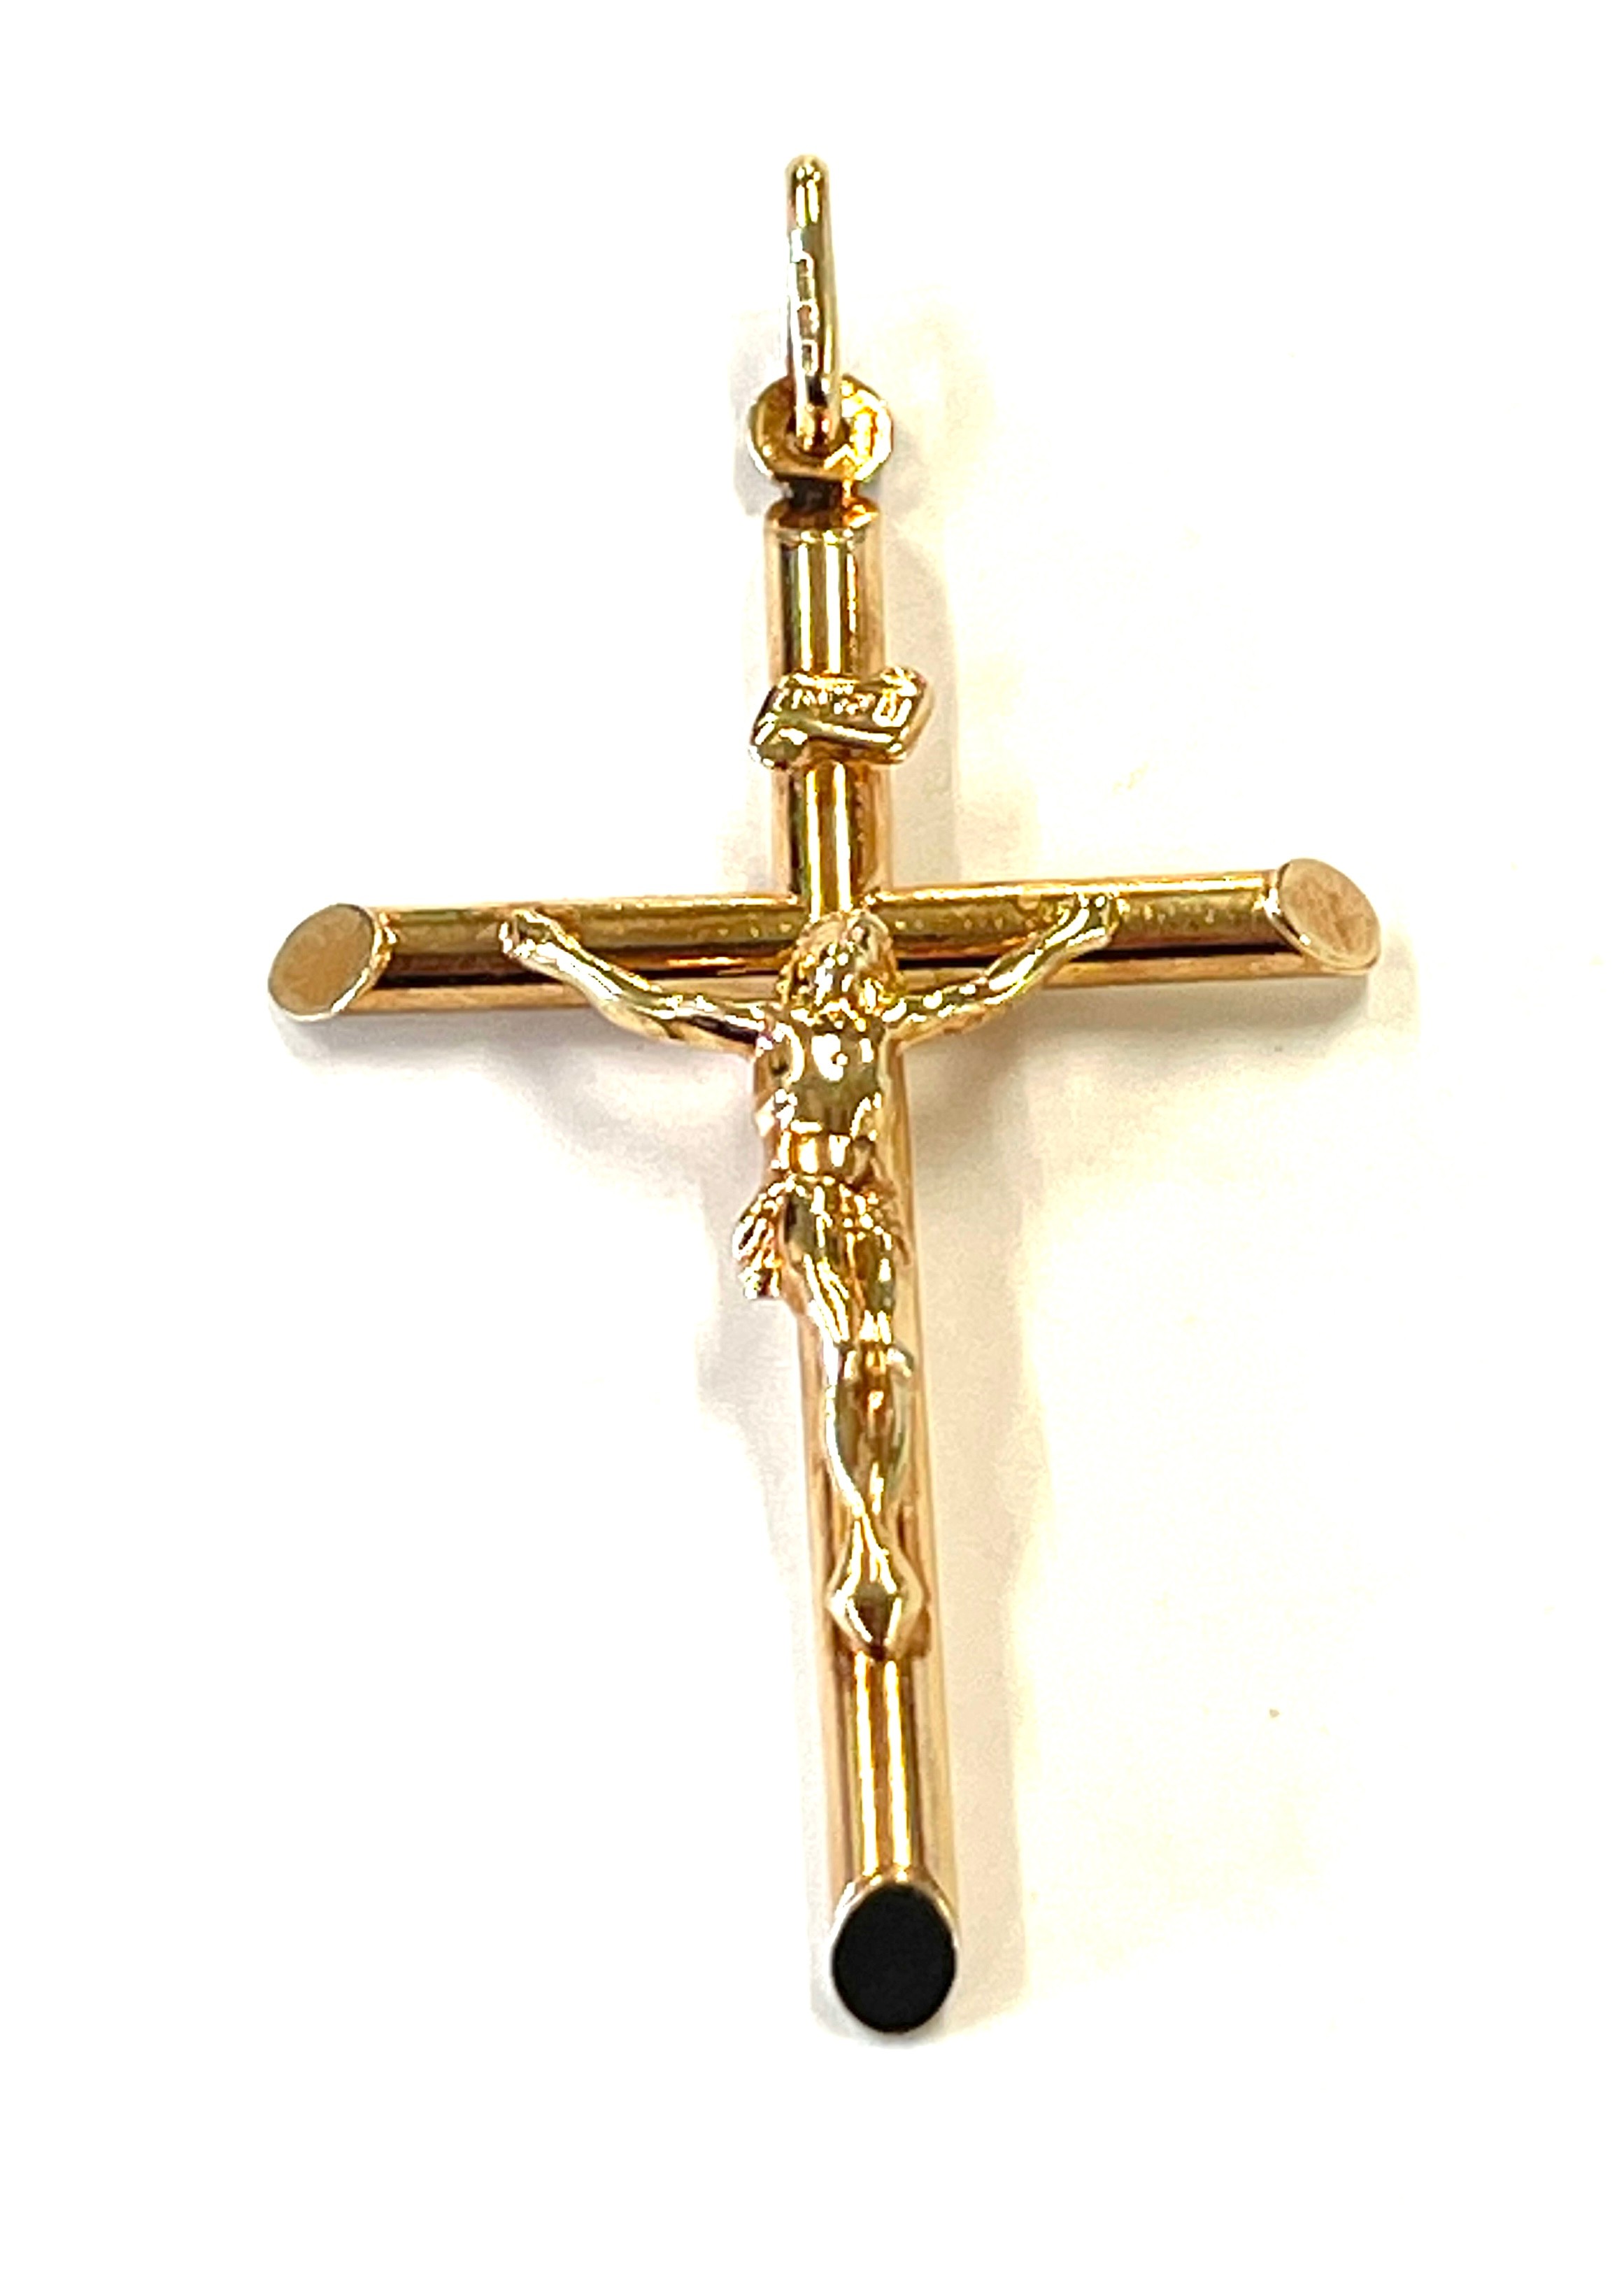 9ct gold detailed crufix /cross, approximate weight 2g